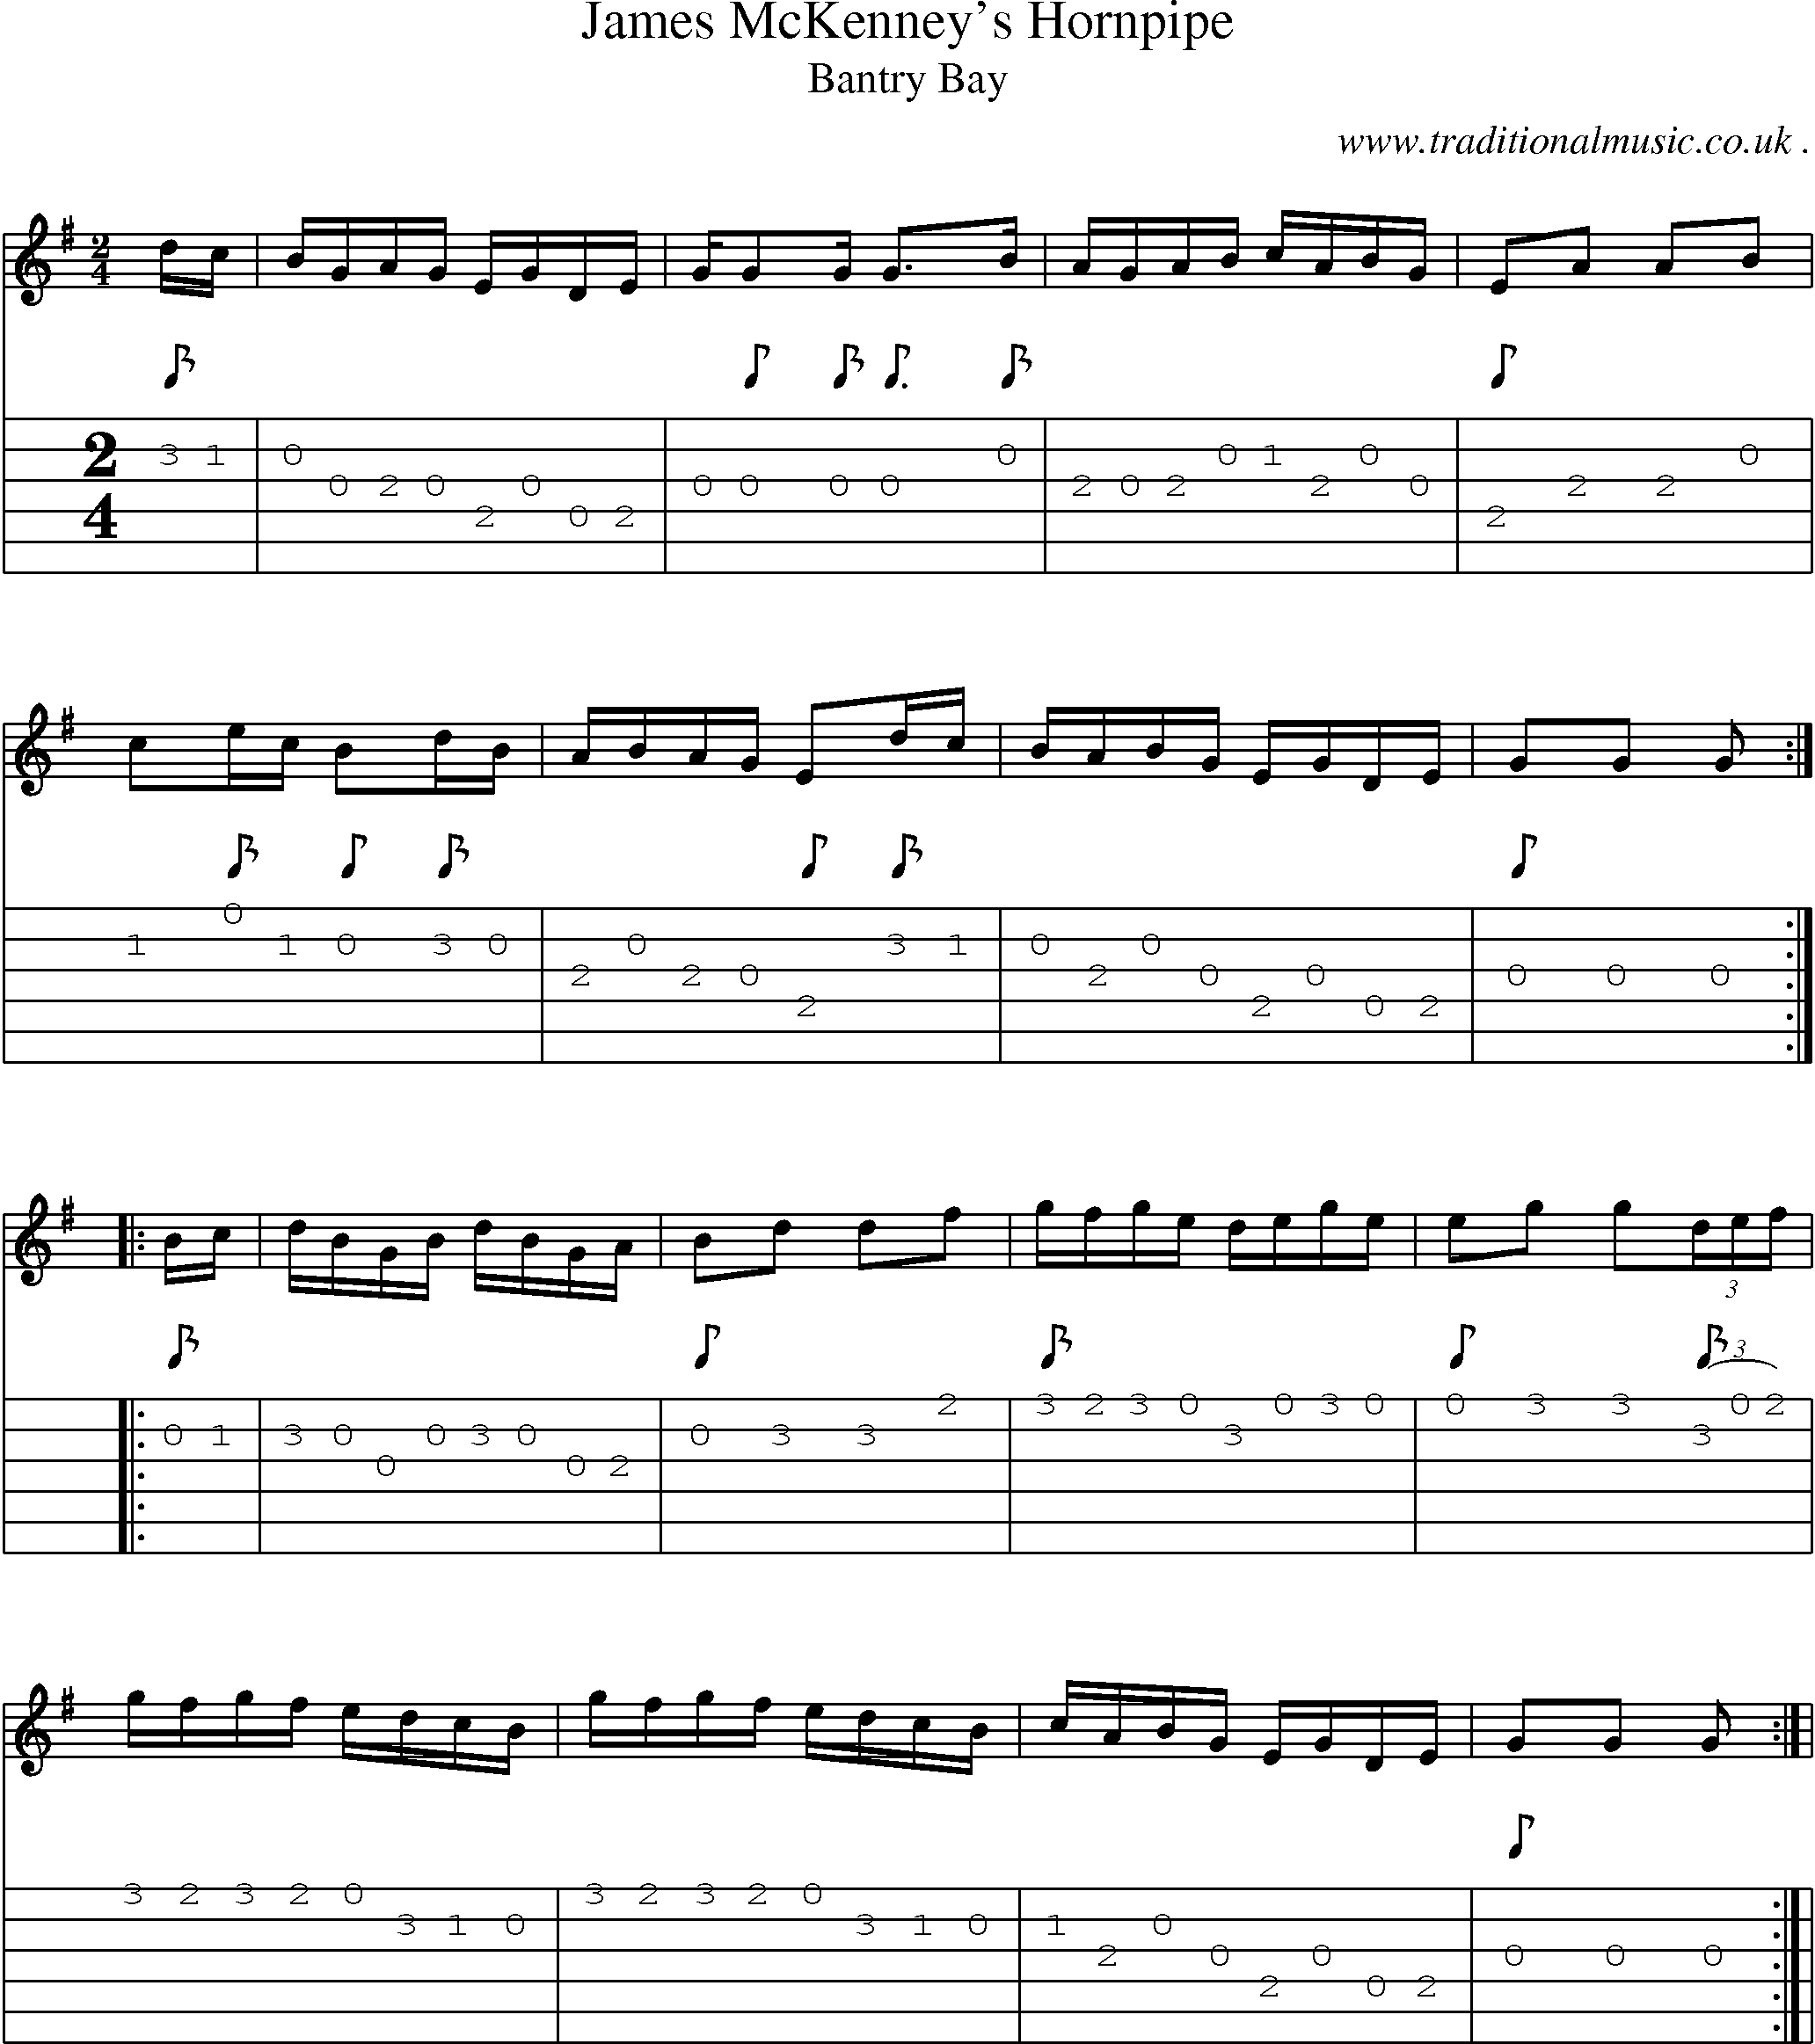 Sheet-Music and Guitar Tabs for James Mckenneys Hornpipe